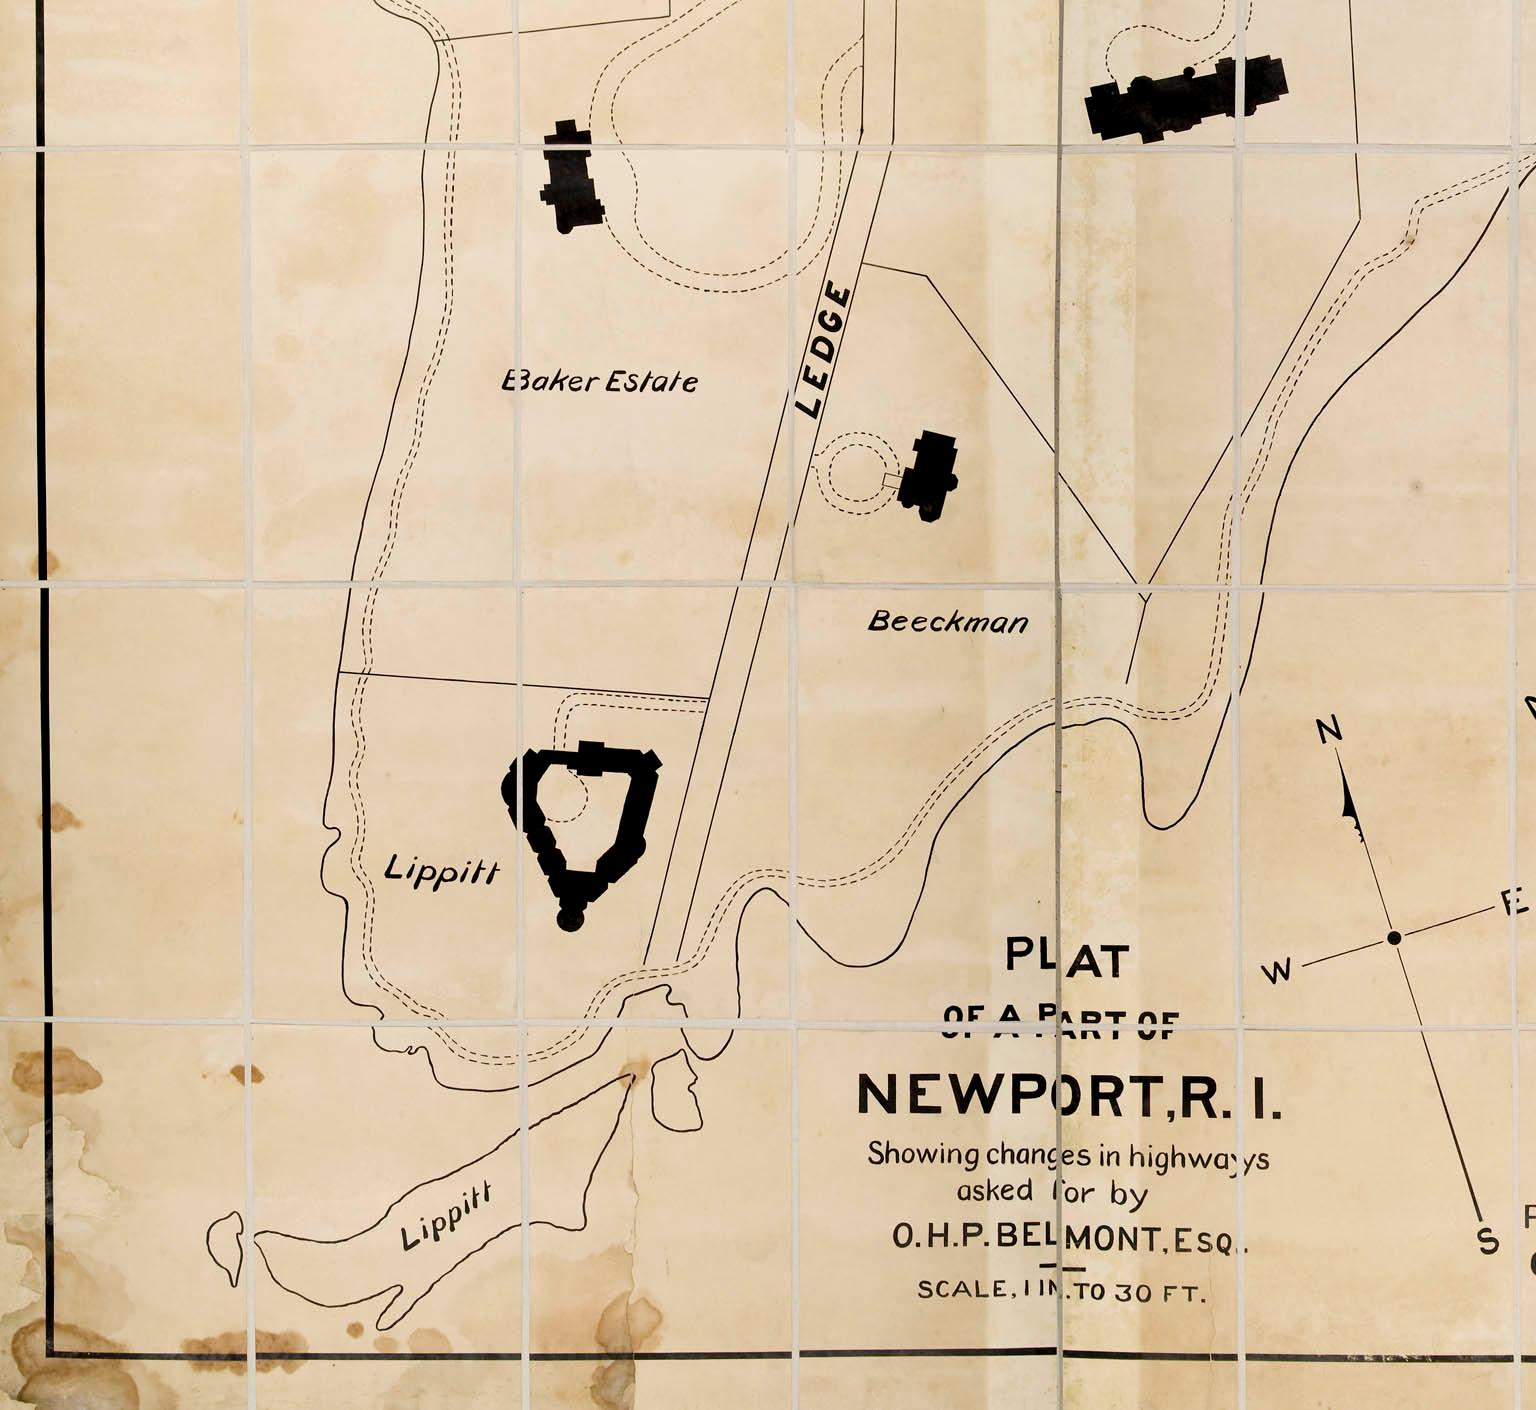 PLAN OF A PART OF NEWPORT, R.I. SHOWING CHANGES IN HIGHWAYS ASKED FOR BY O.H.P. BELMONT, ESQ.

The original ink and watercolor plan on paper from 1907.  The plan is extremely large; if fully assembled it would measure no less than 11.5 feet in